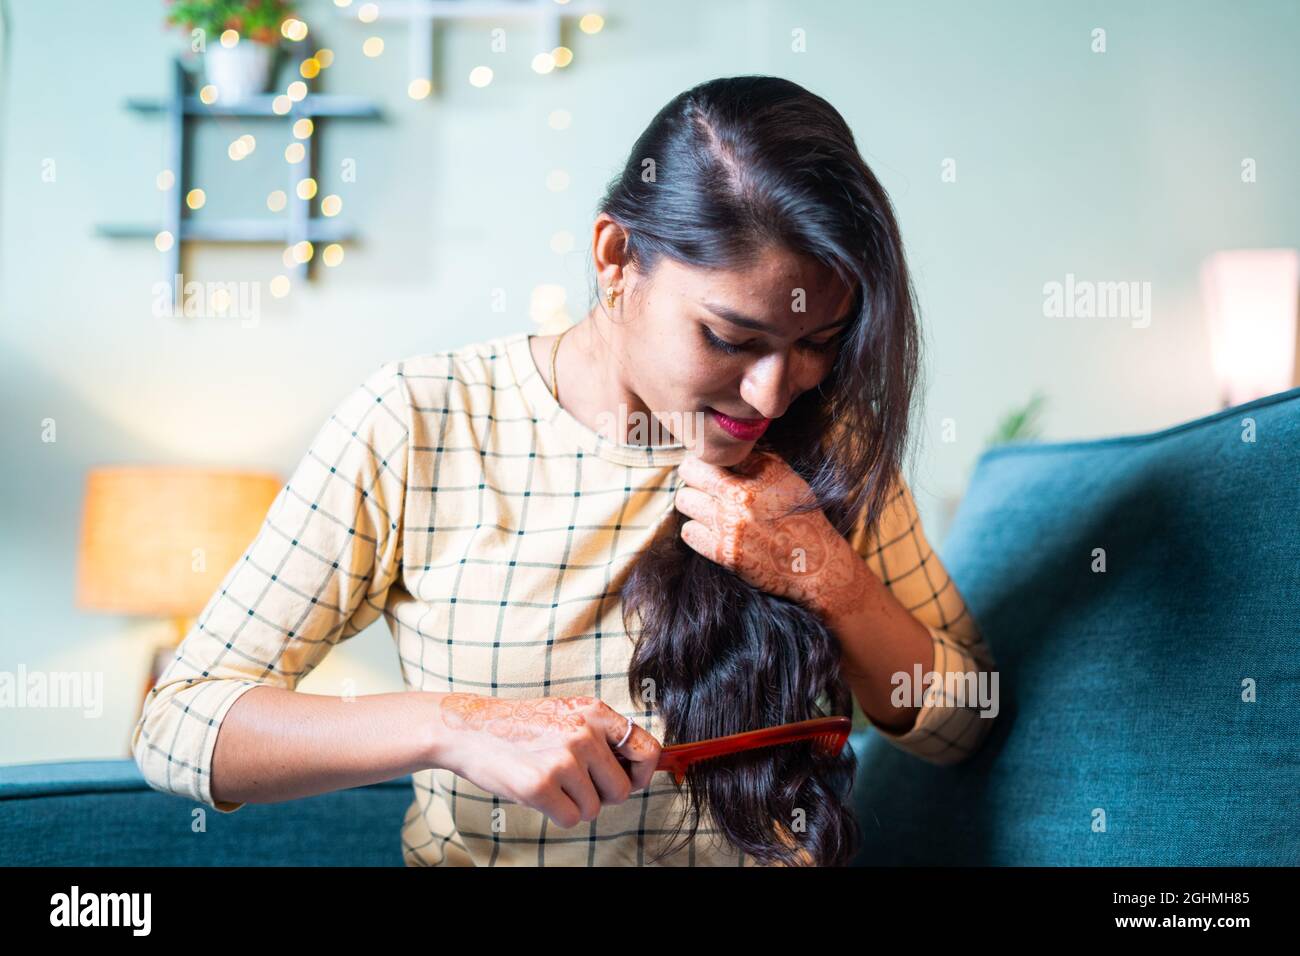 Young Indian girl on sofa combing her long hairs - concept of woman getting ready and daily rituals. Stock Photo